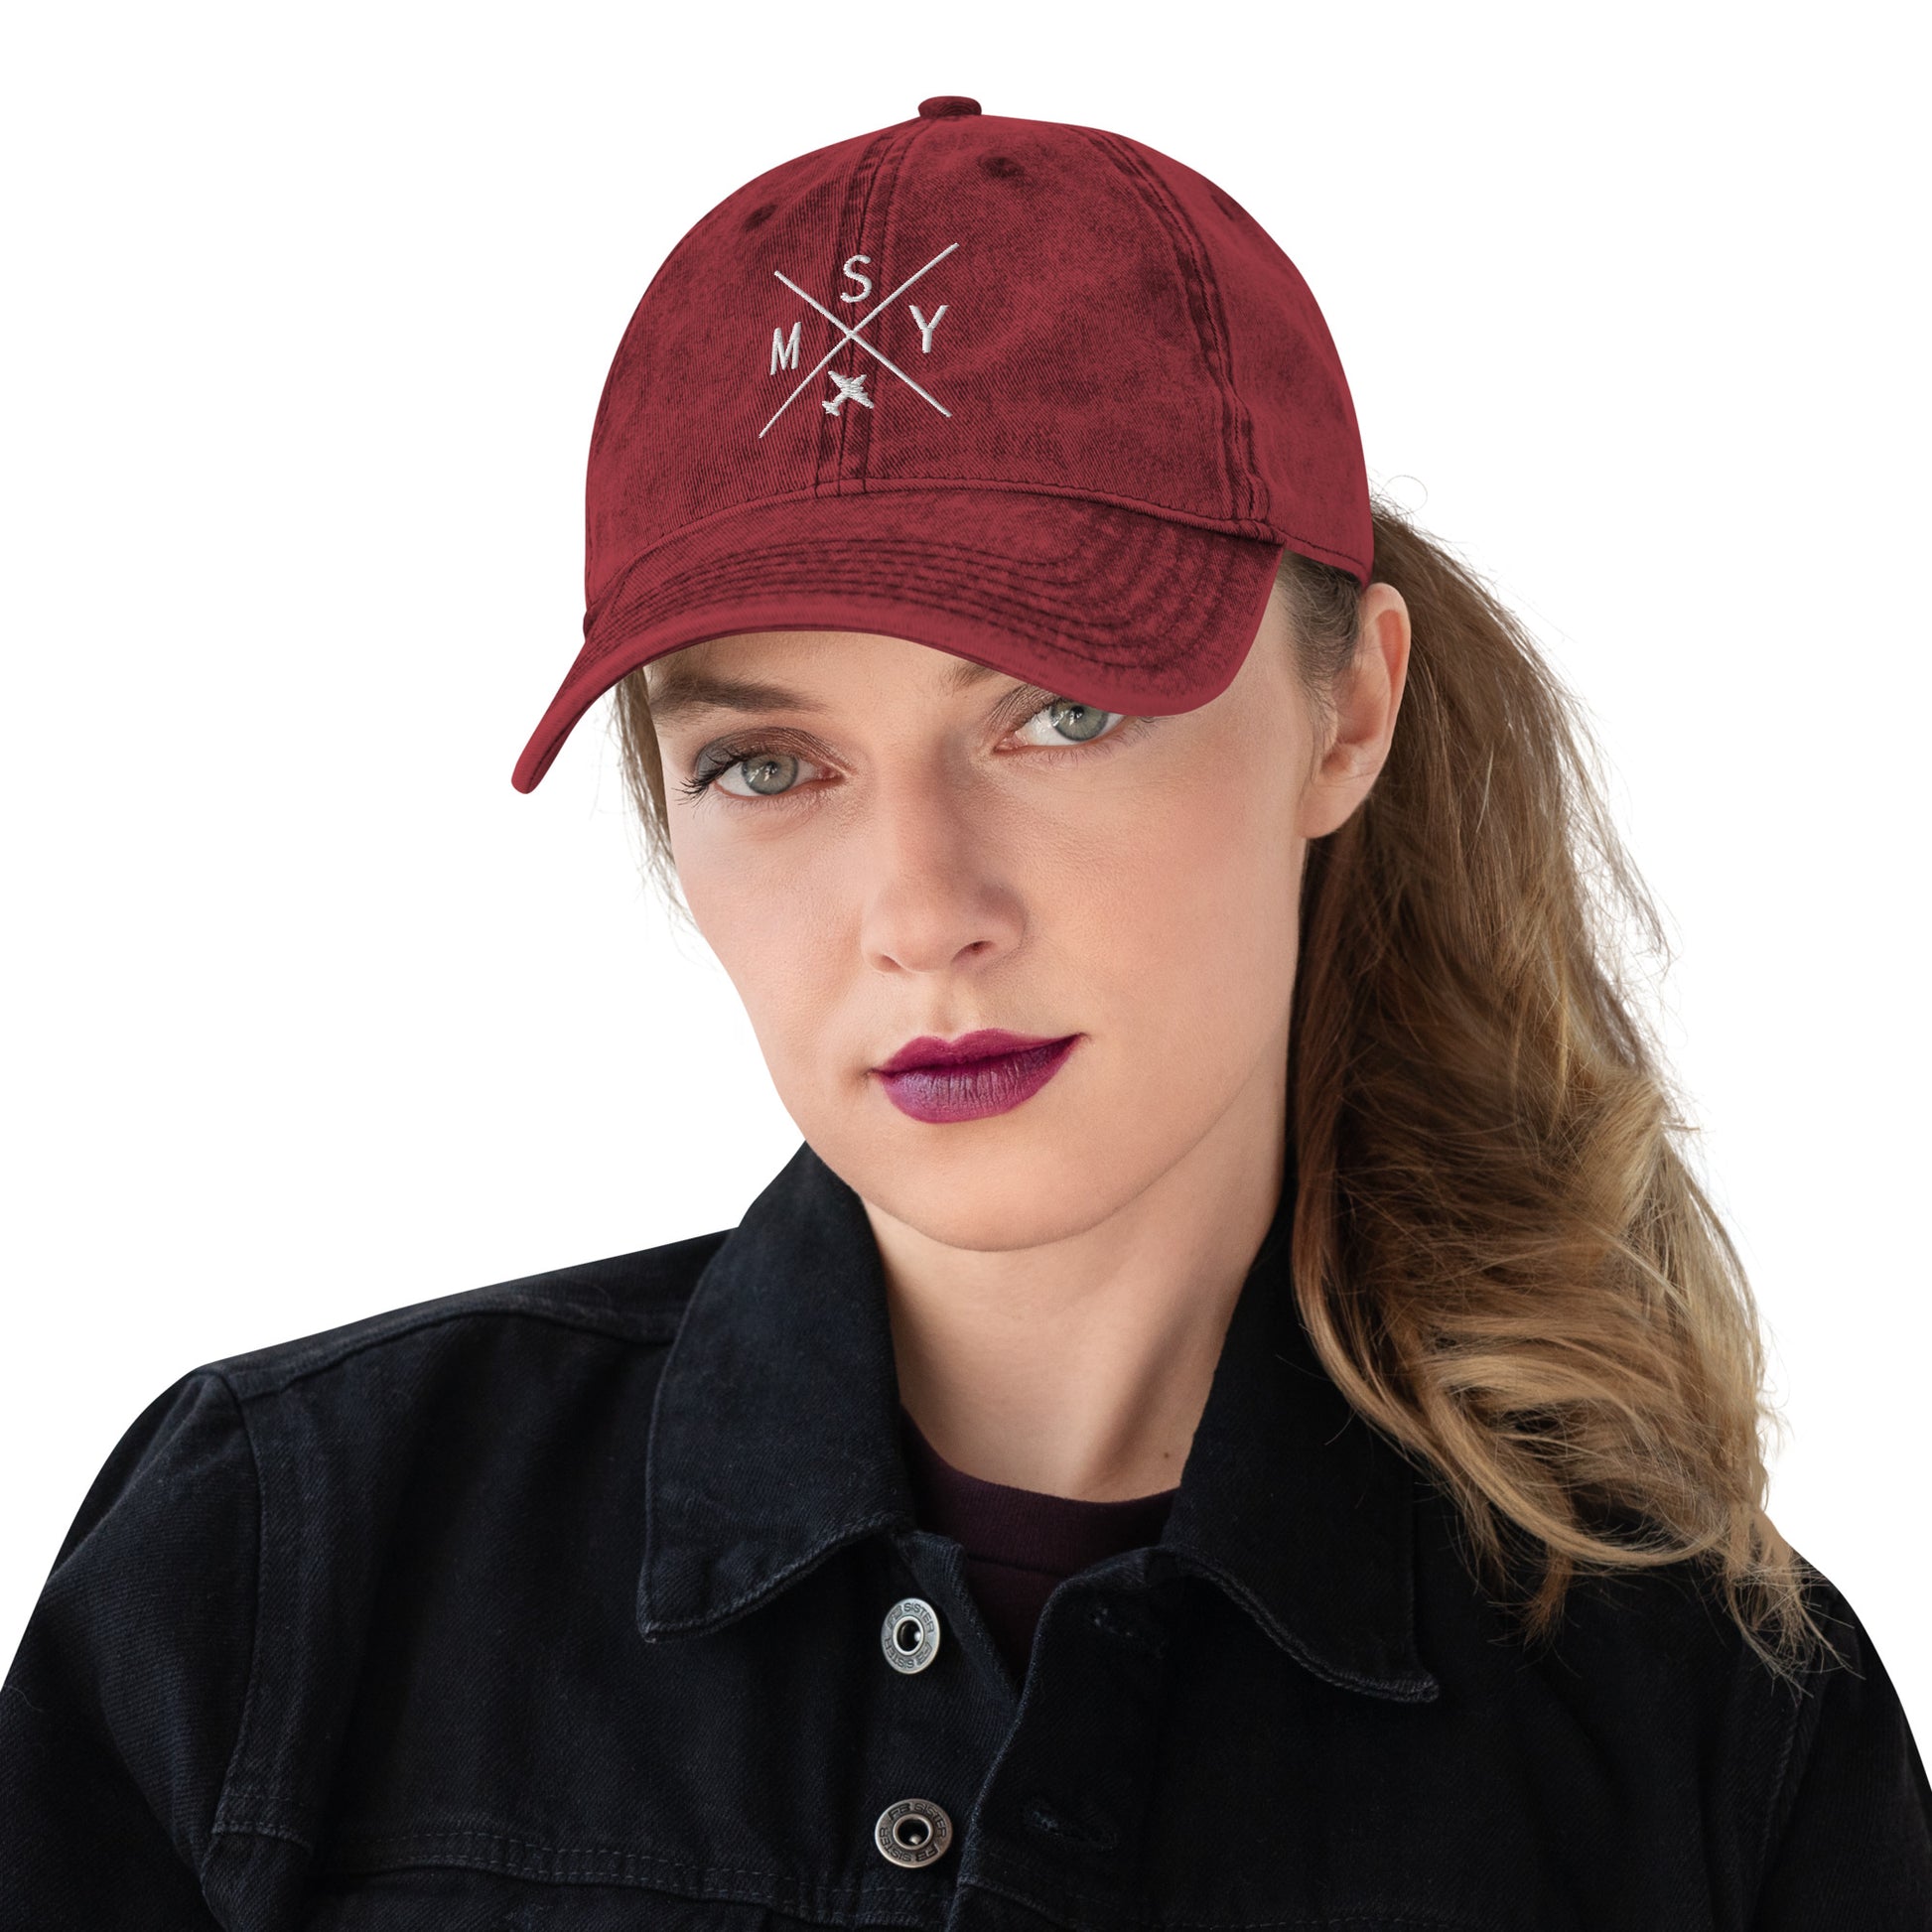 Crossed-X Cotton Twill Cap - White • MSY New Orleans • YHM Designs - Image 06